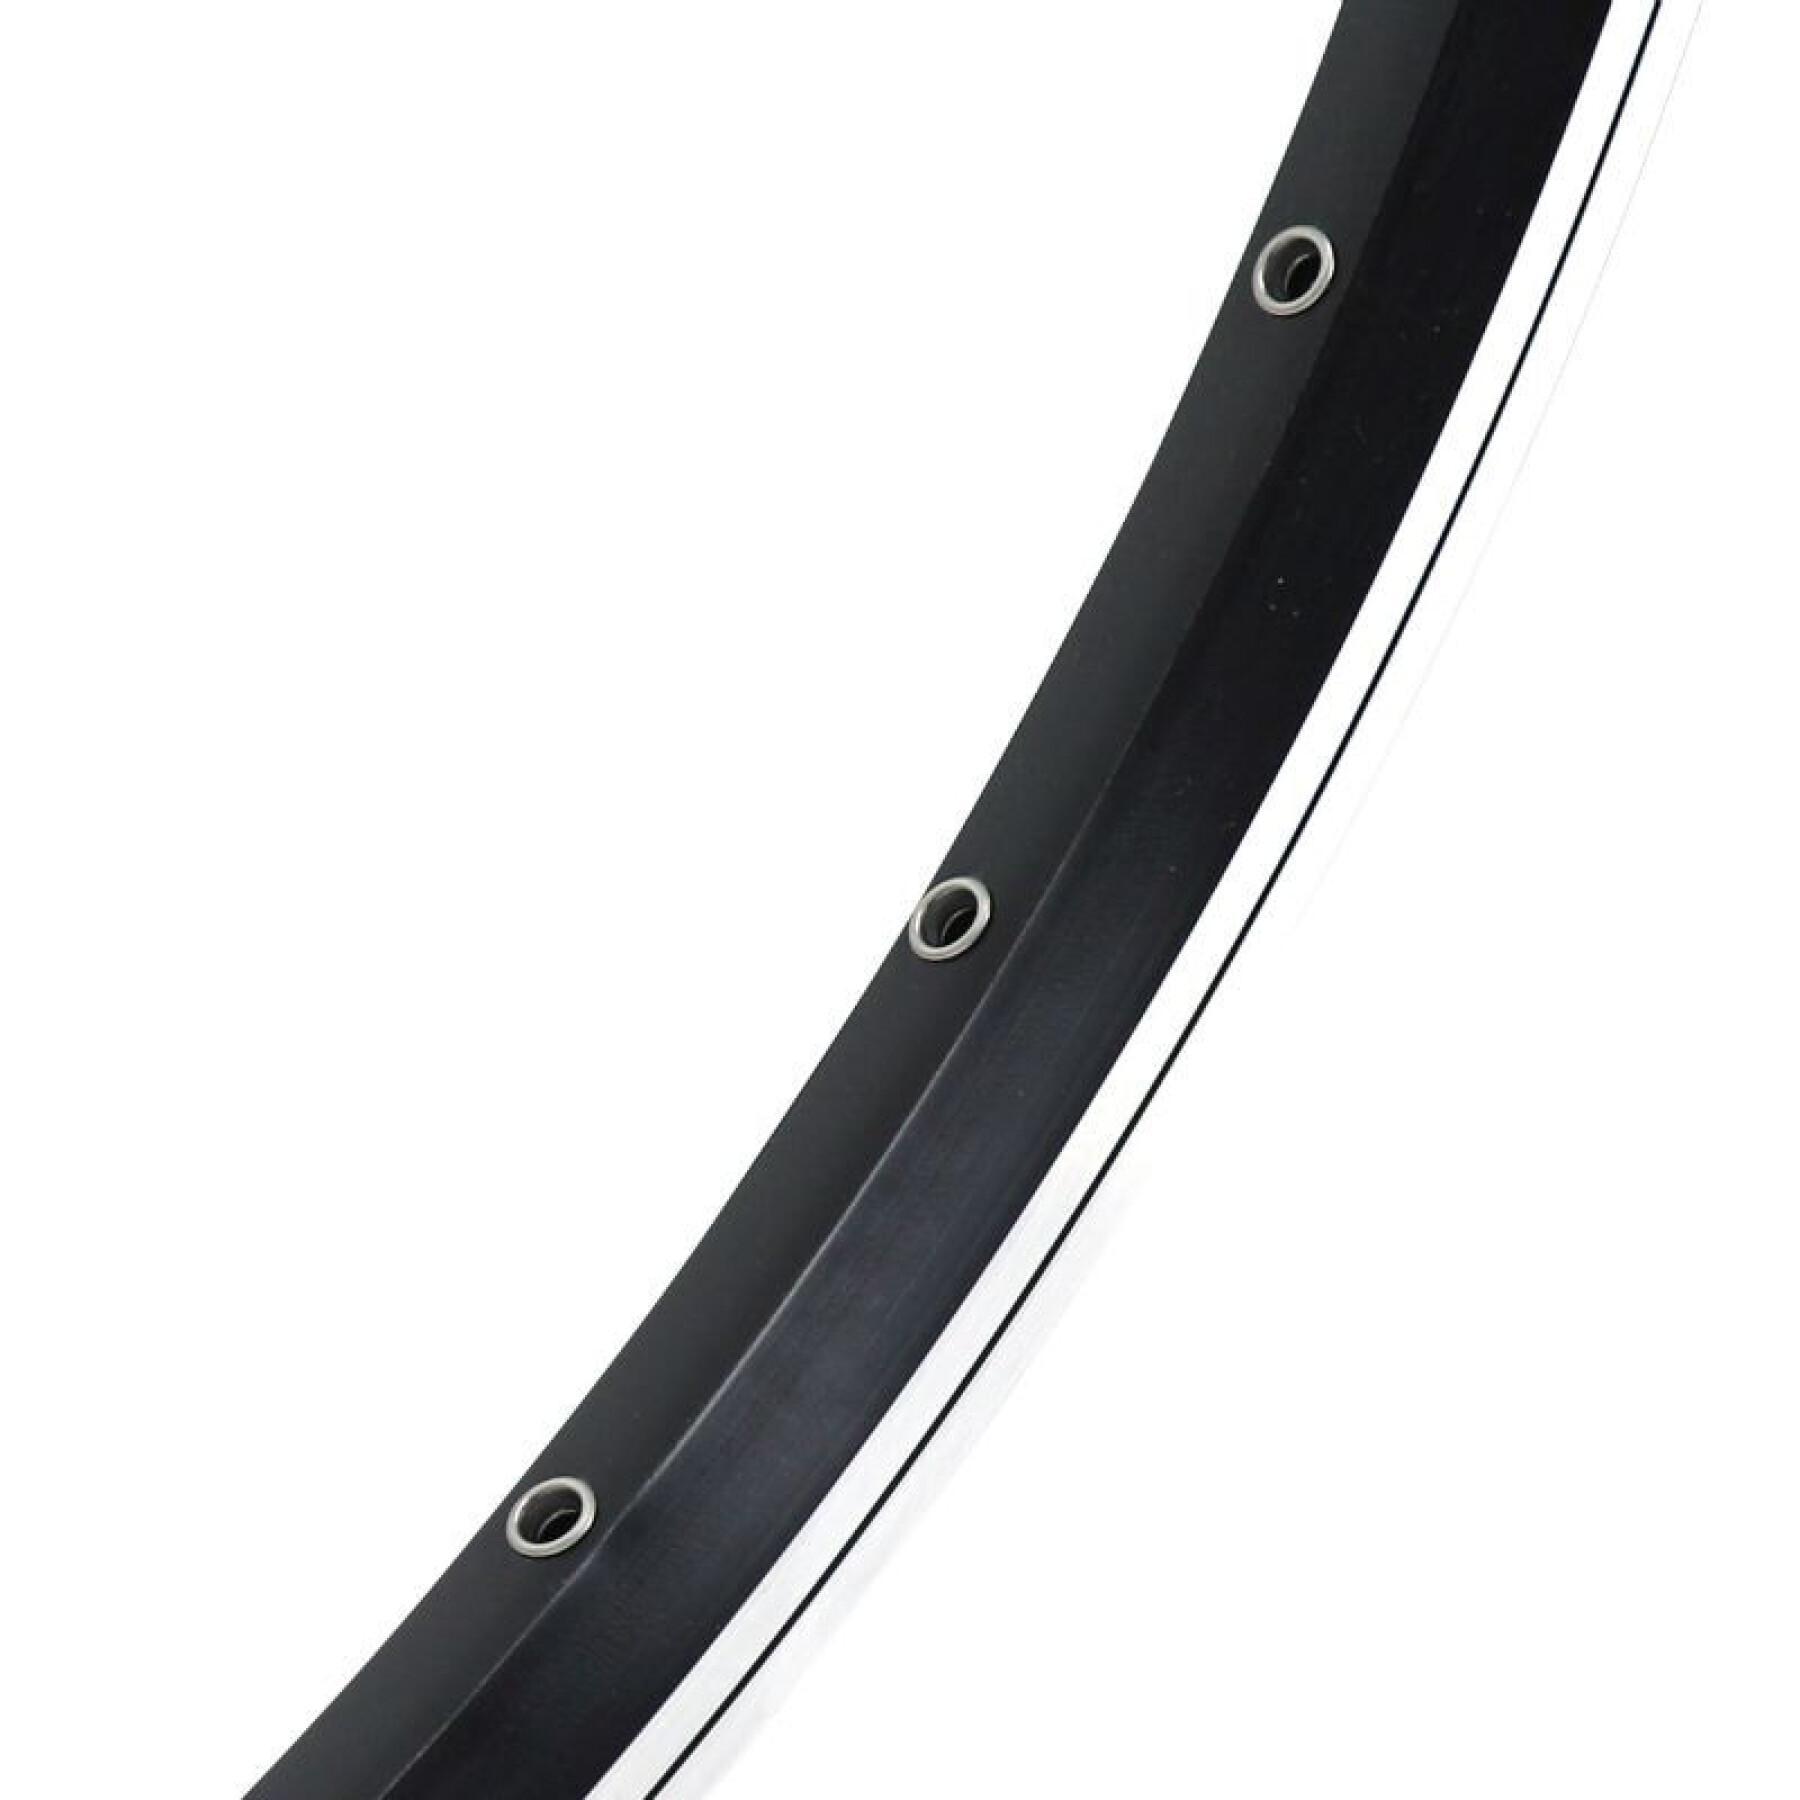 Double wall rim with eyelets Velox VTC Mach1 M240 32T.